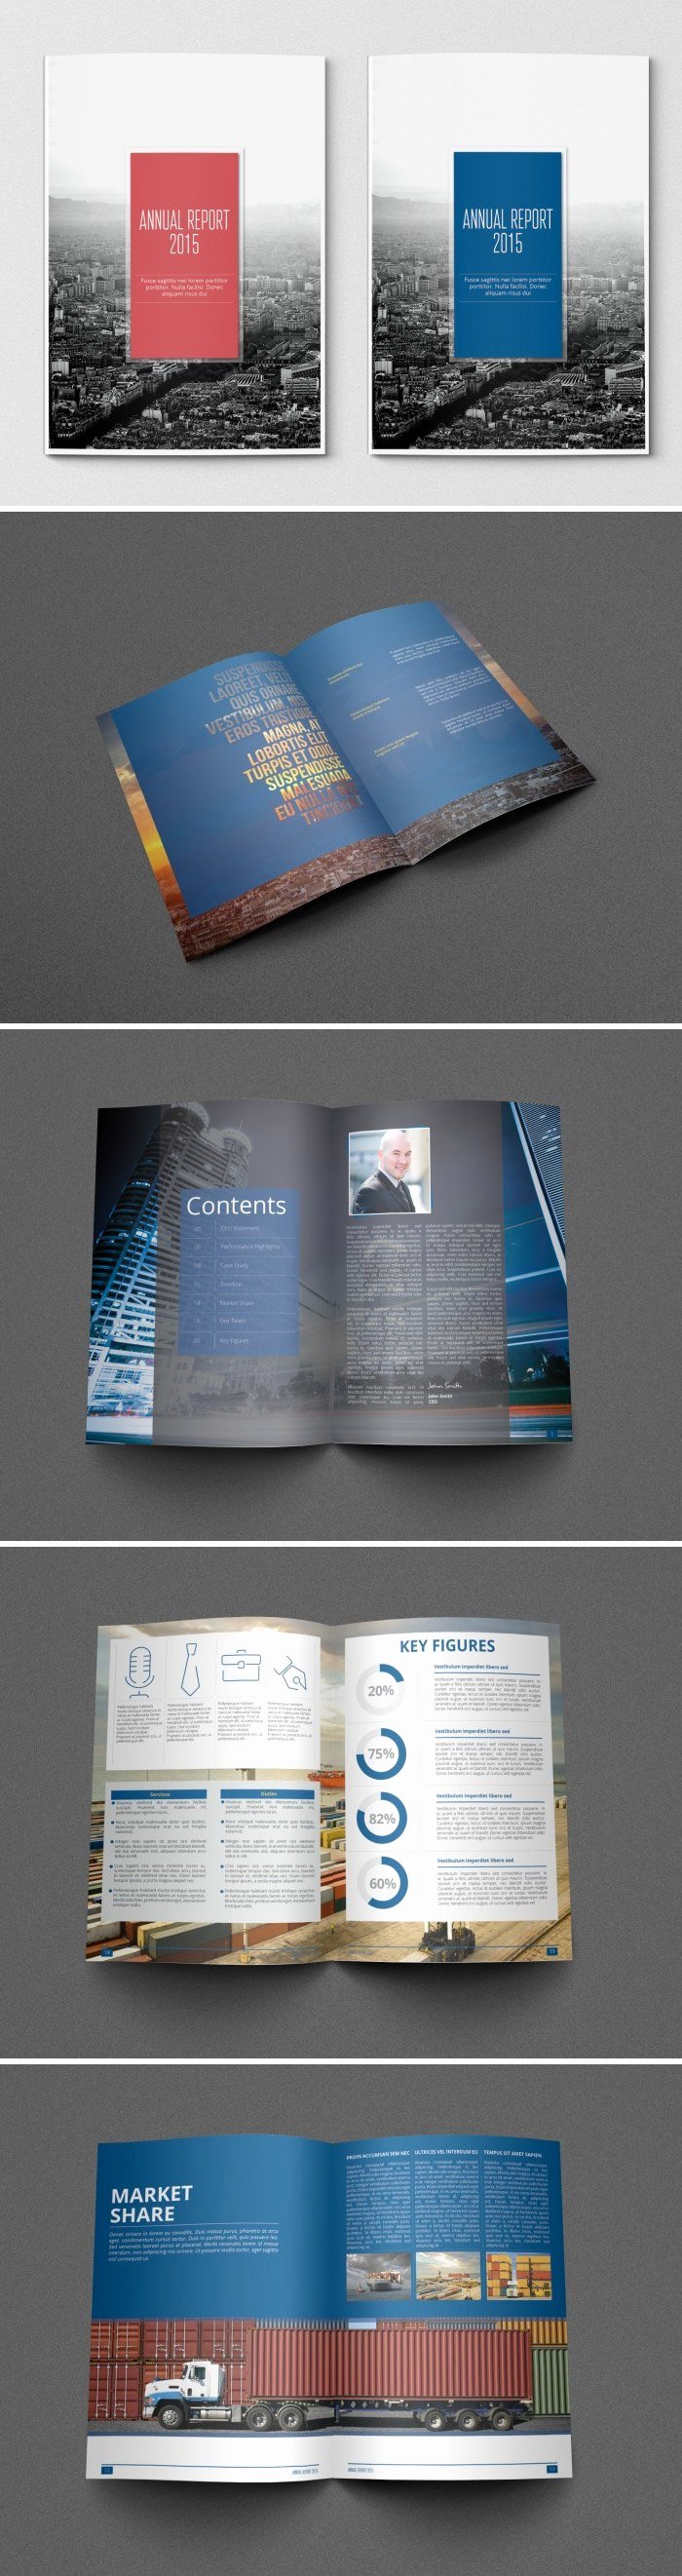 Annual Financial Report Template New A Showcase Of Annual Report Brochure Designs to Check Out